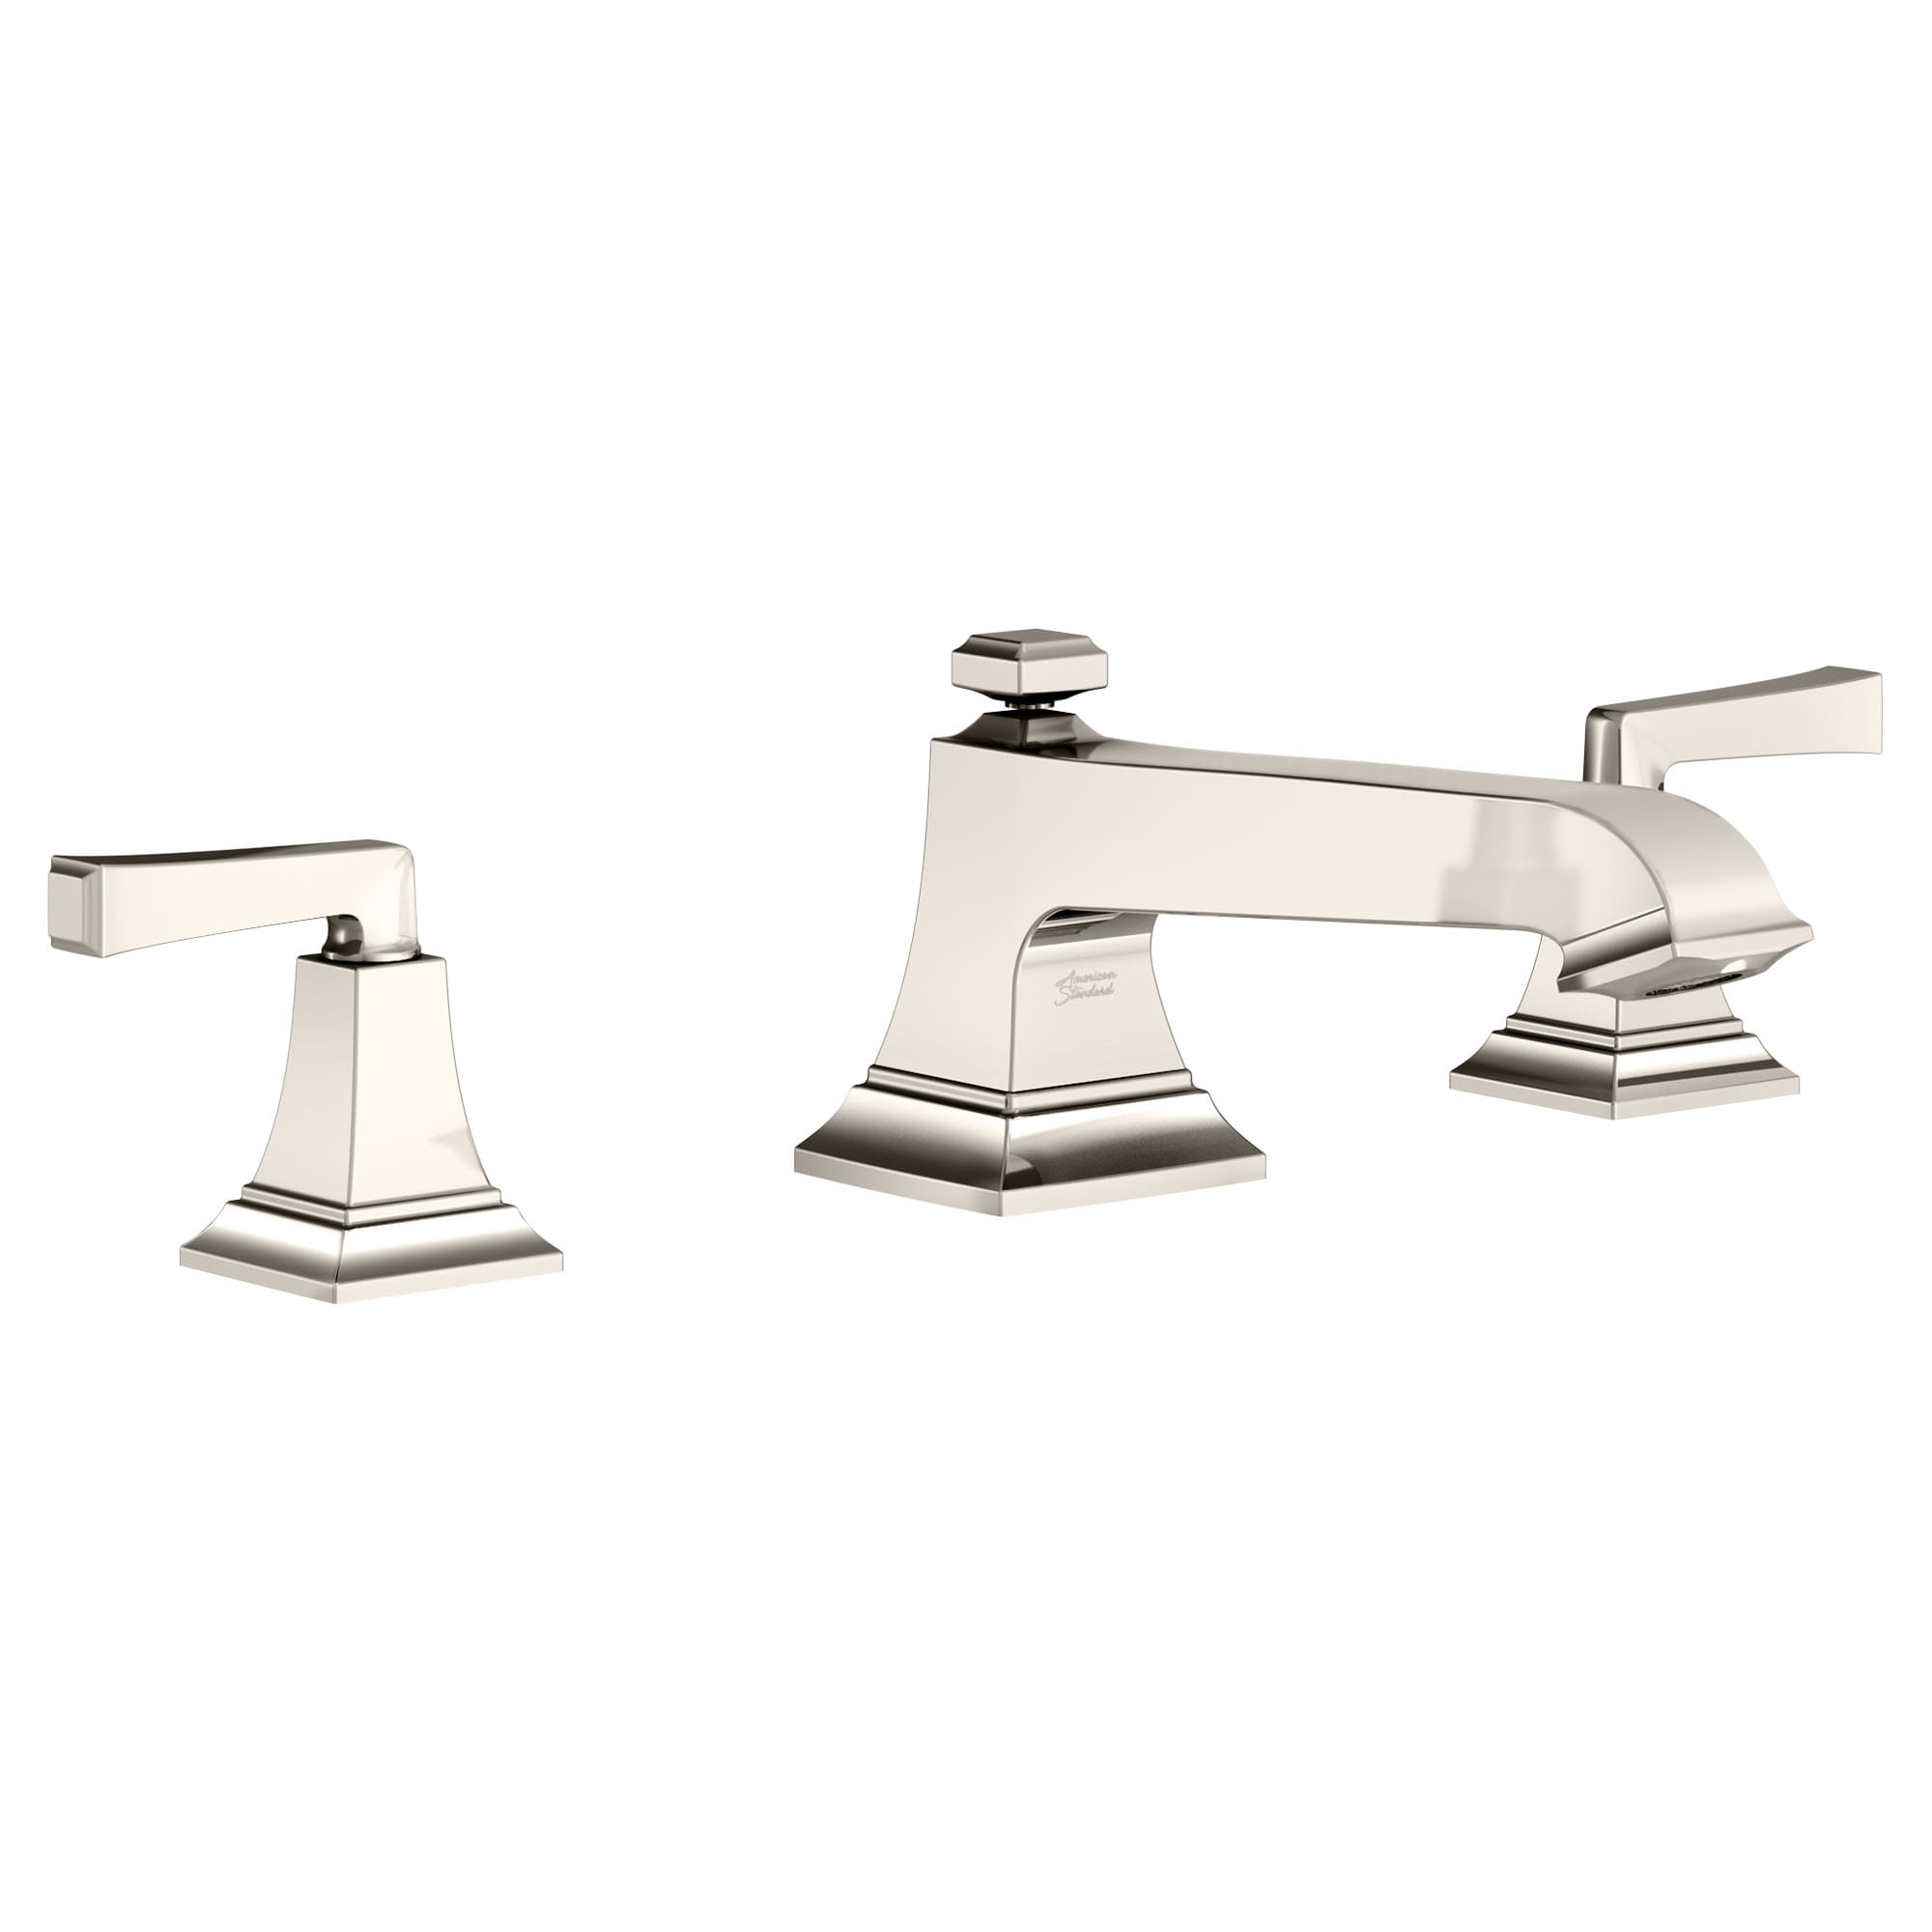 Town Square S Bathub Faucet With Lever Handles for Flash Rough In Valve POLISHED  NICKEL